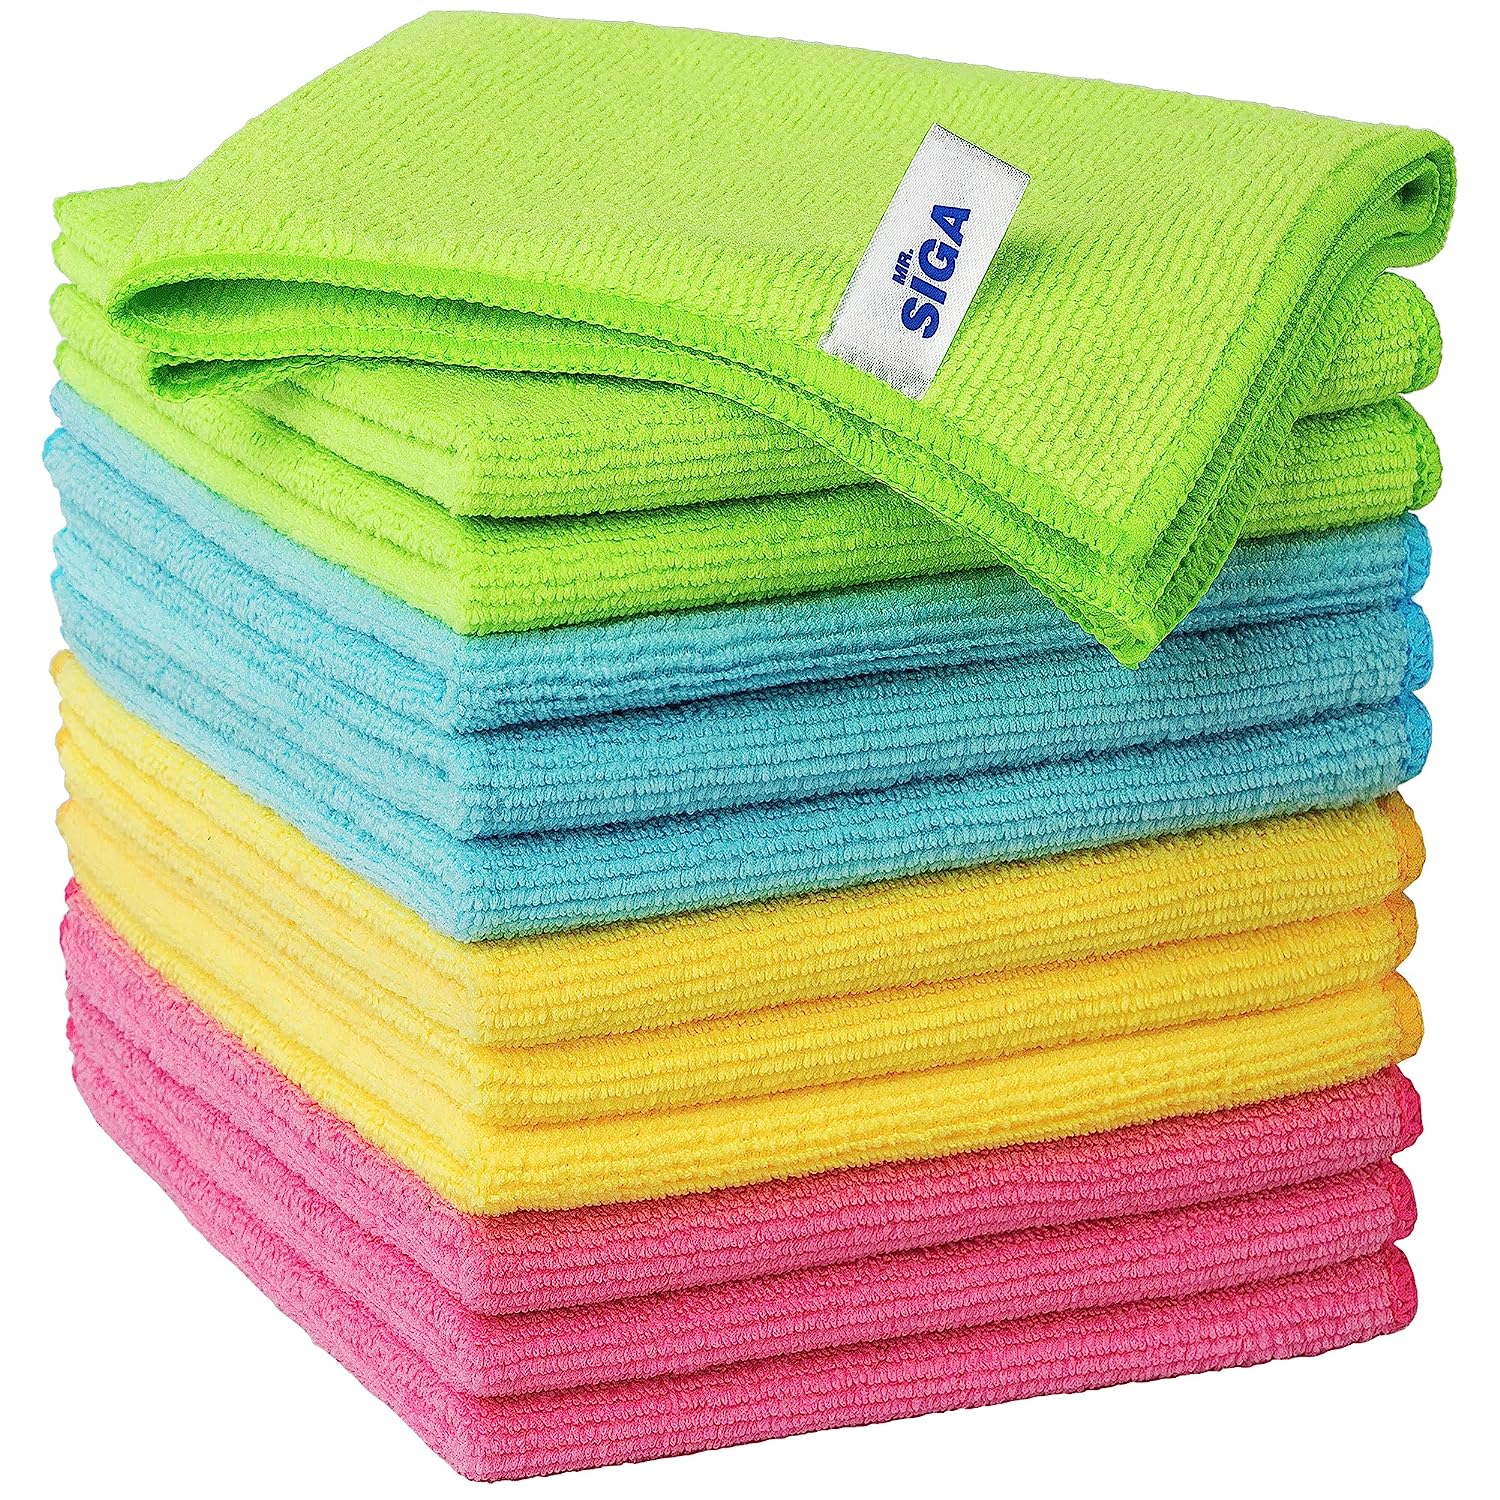 MR.SIGA Microfiber Cleaning Cloth,Pack of 12